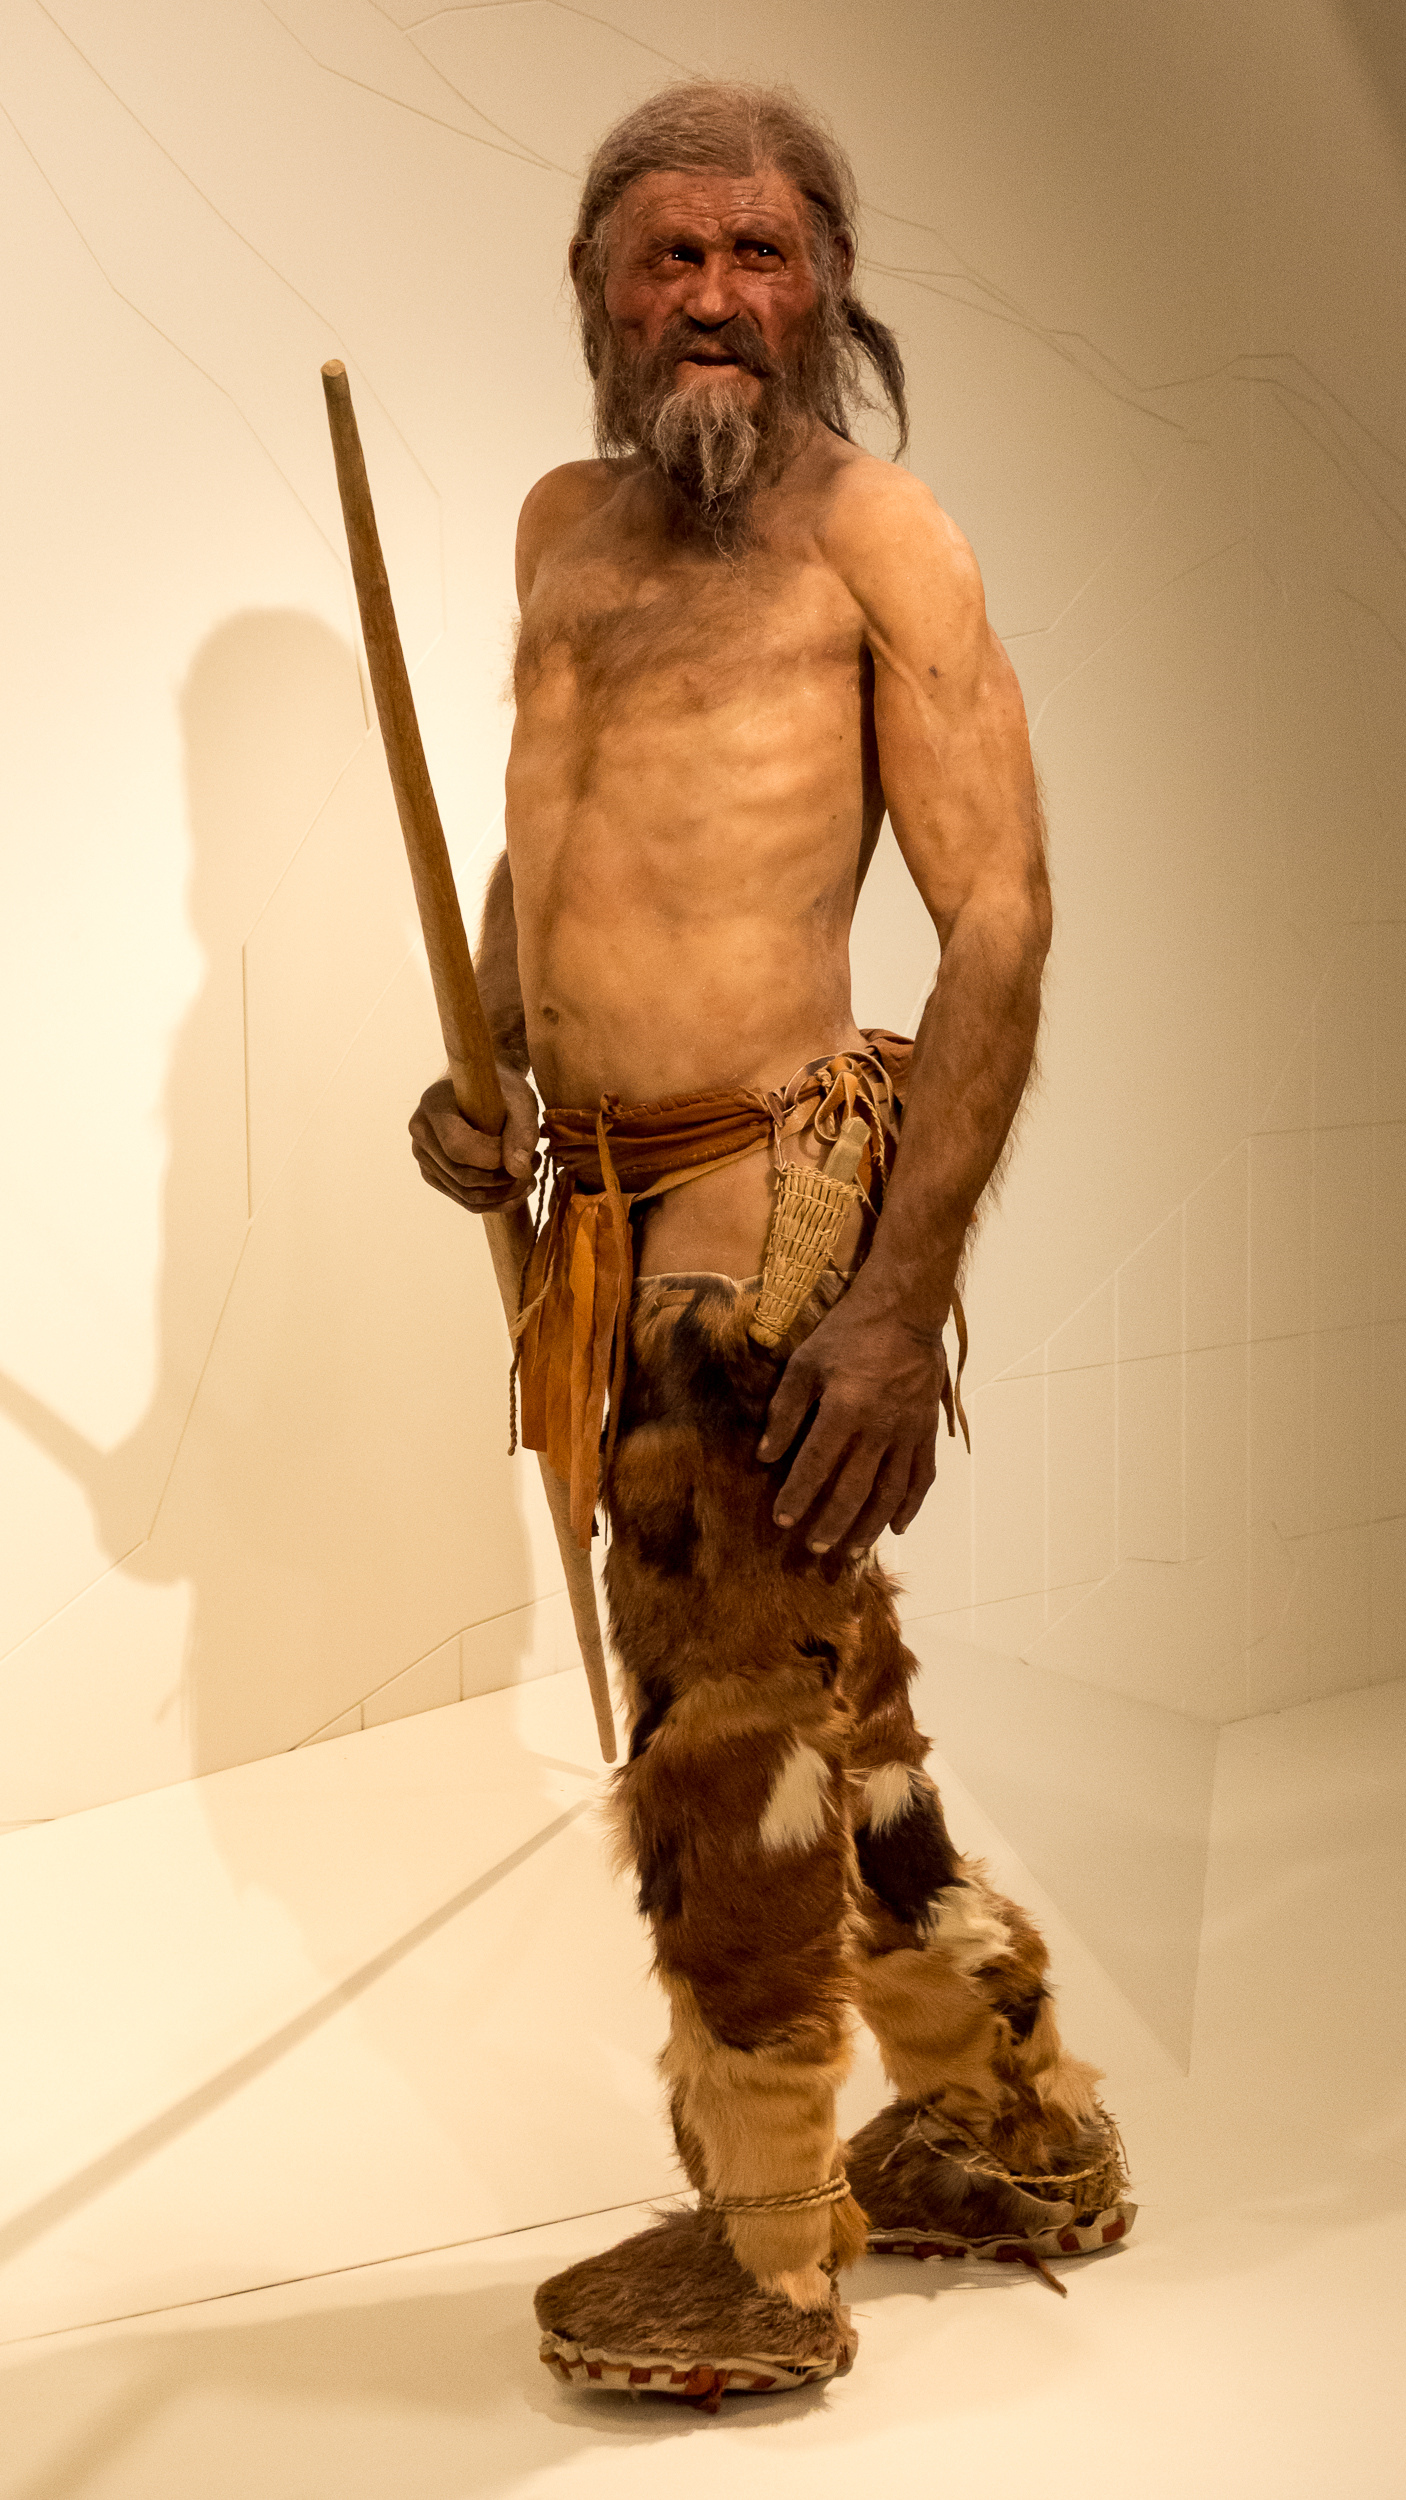 An image of a model of a pre-historic man. He is wearing garments made of fur and hide and carries a stick. He has significant facial hair.